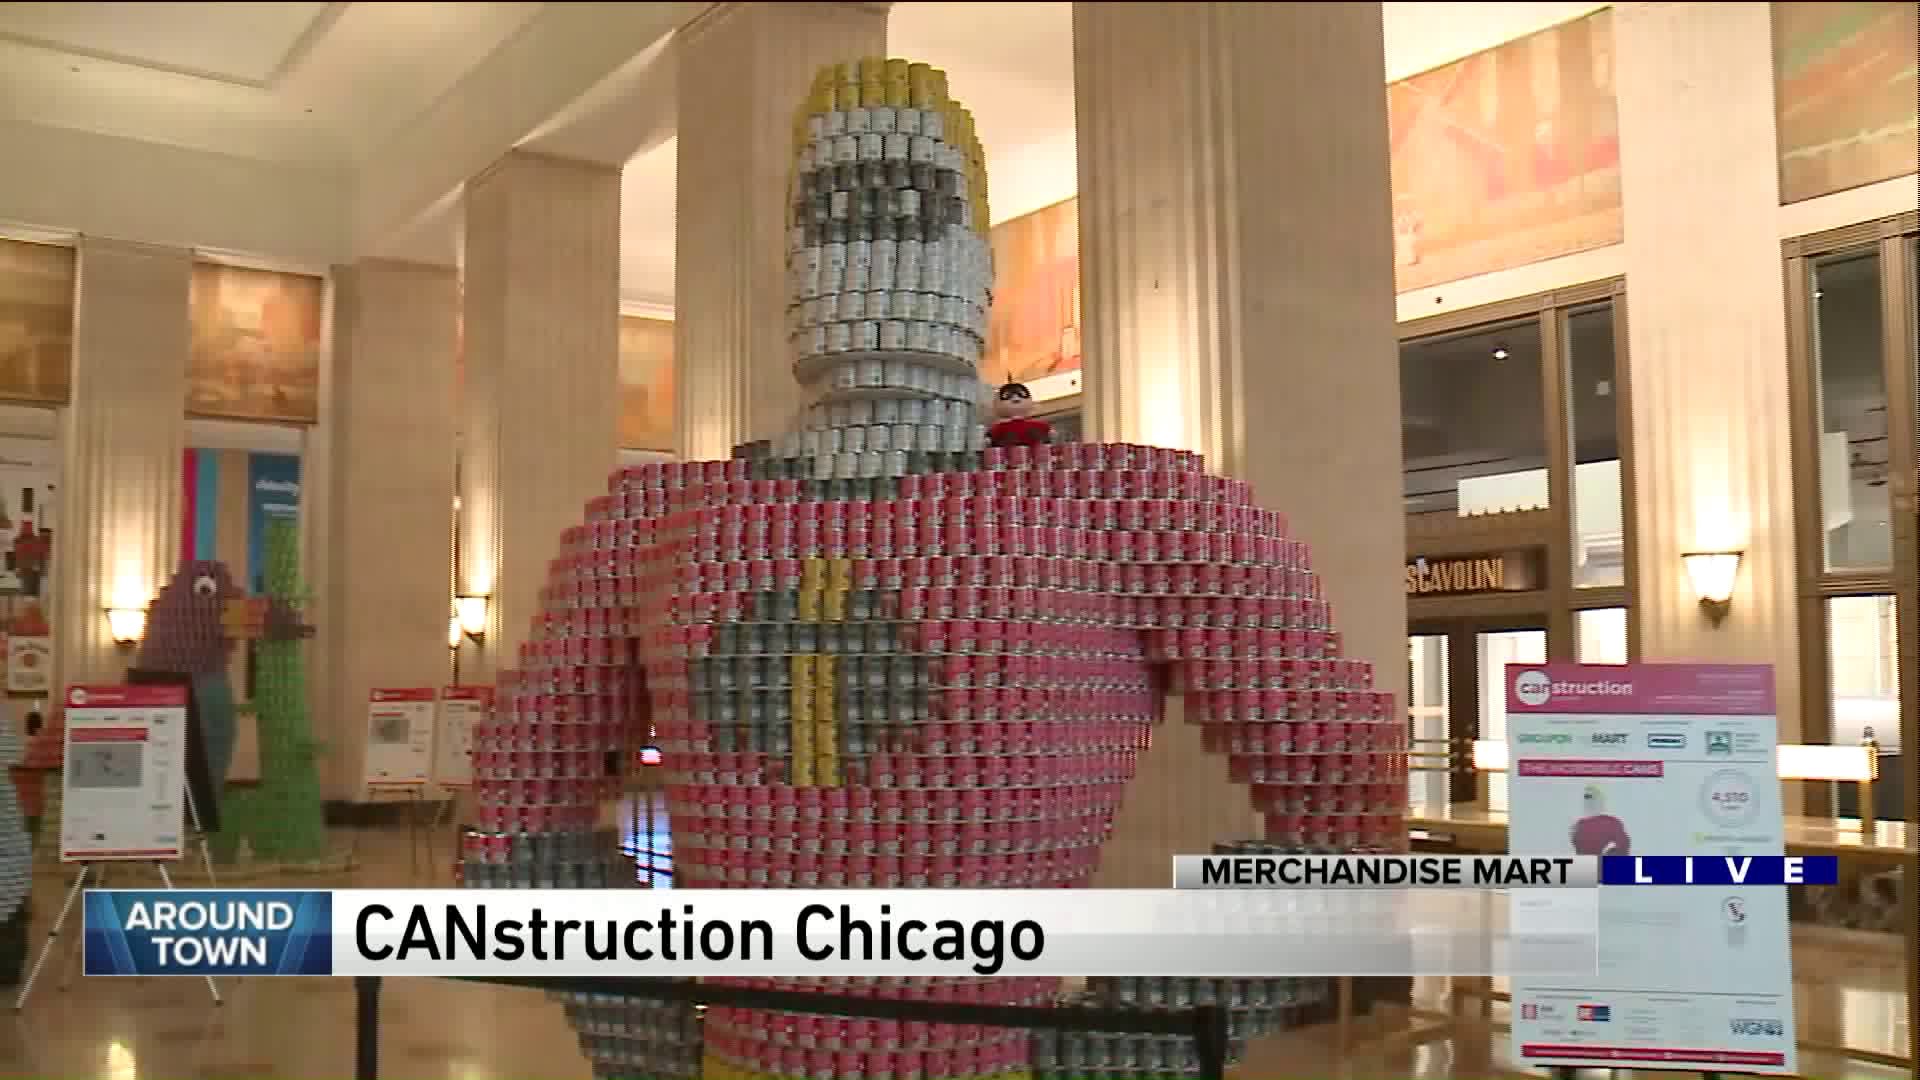 Around Town previews CANstruction Chicago